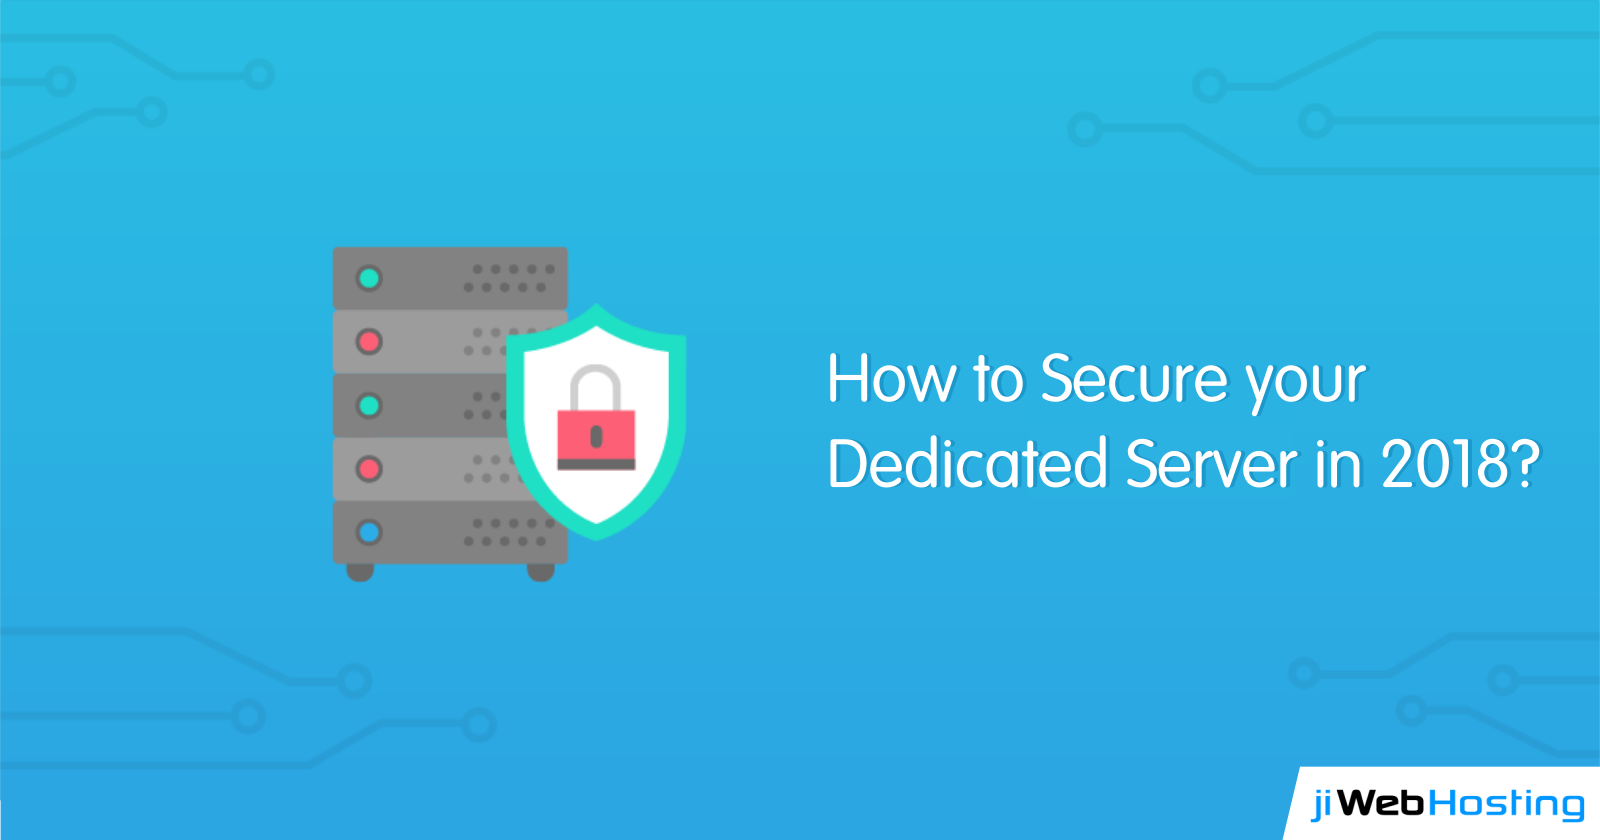 How to Secure your Dedicated Server in 2018?